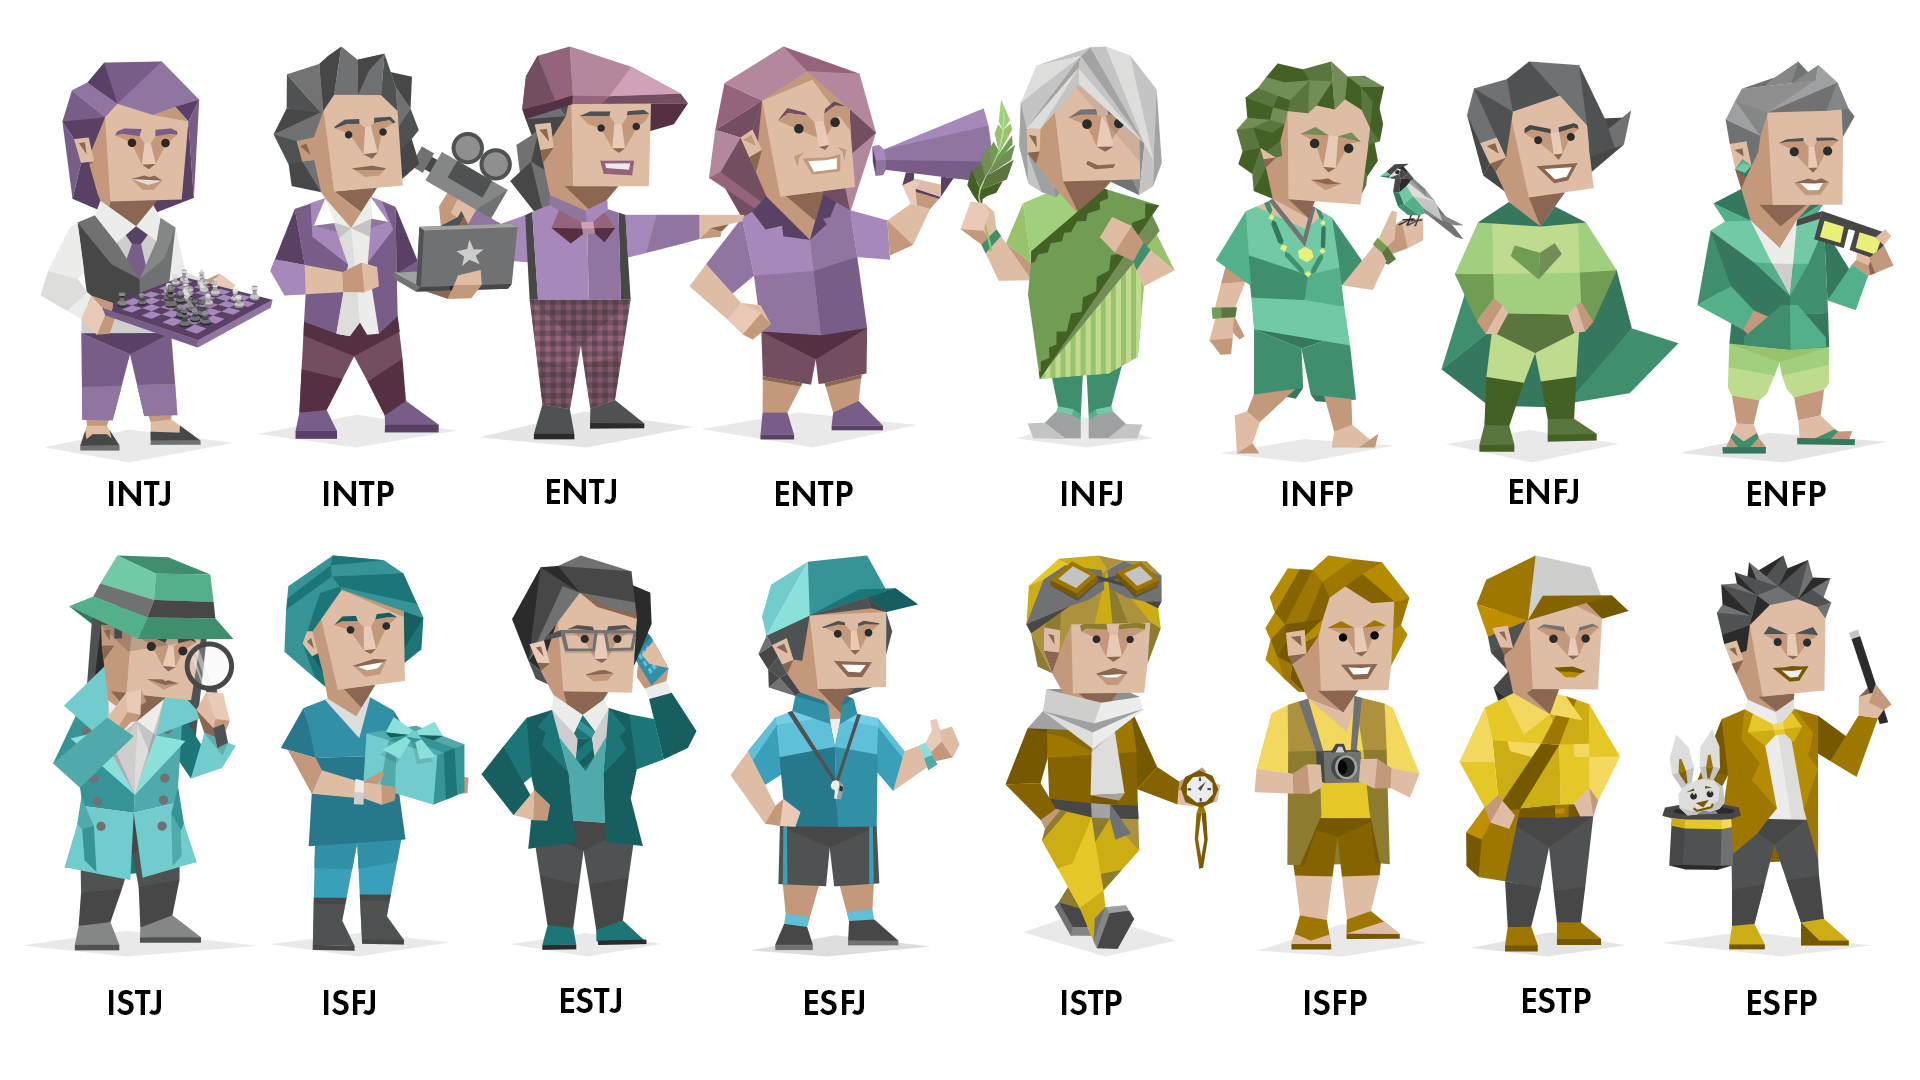 Welcome to Anime in MBTI!